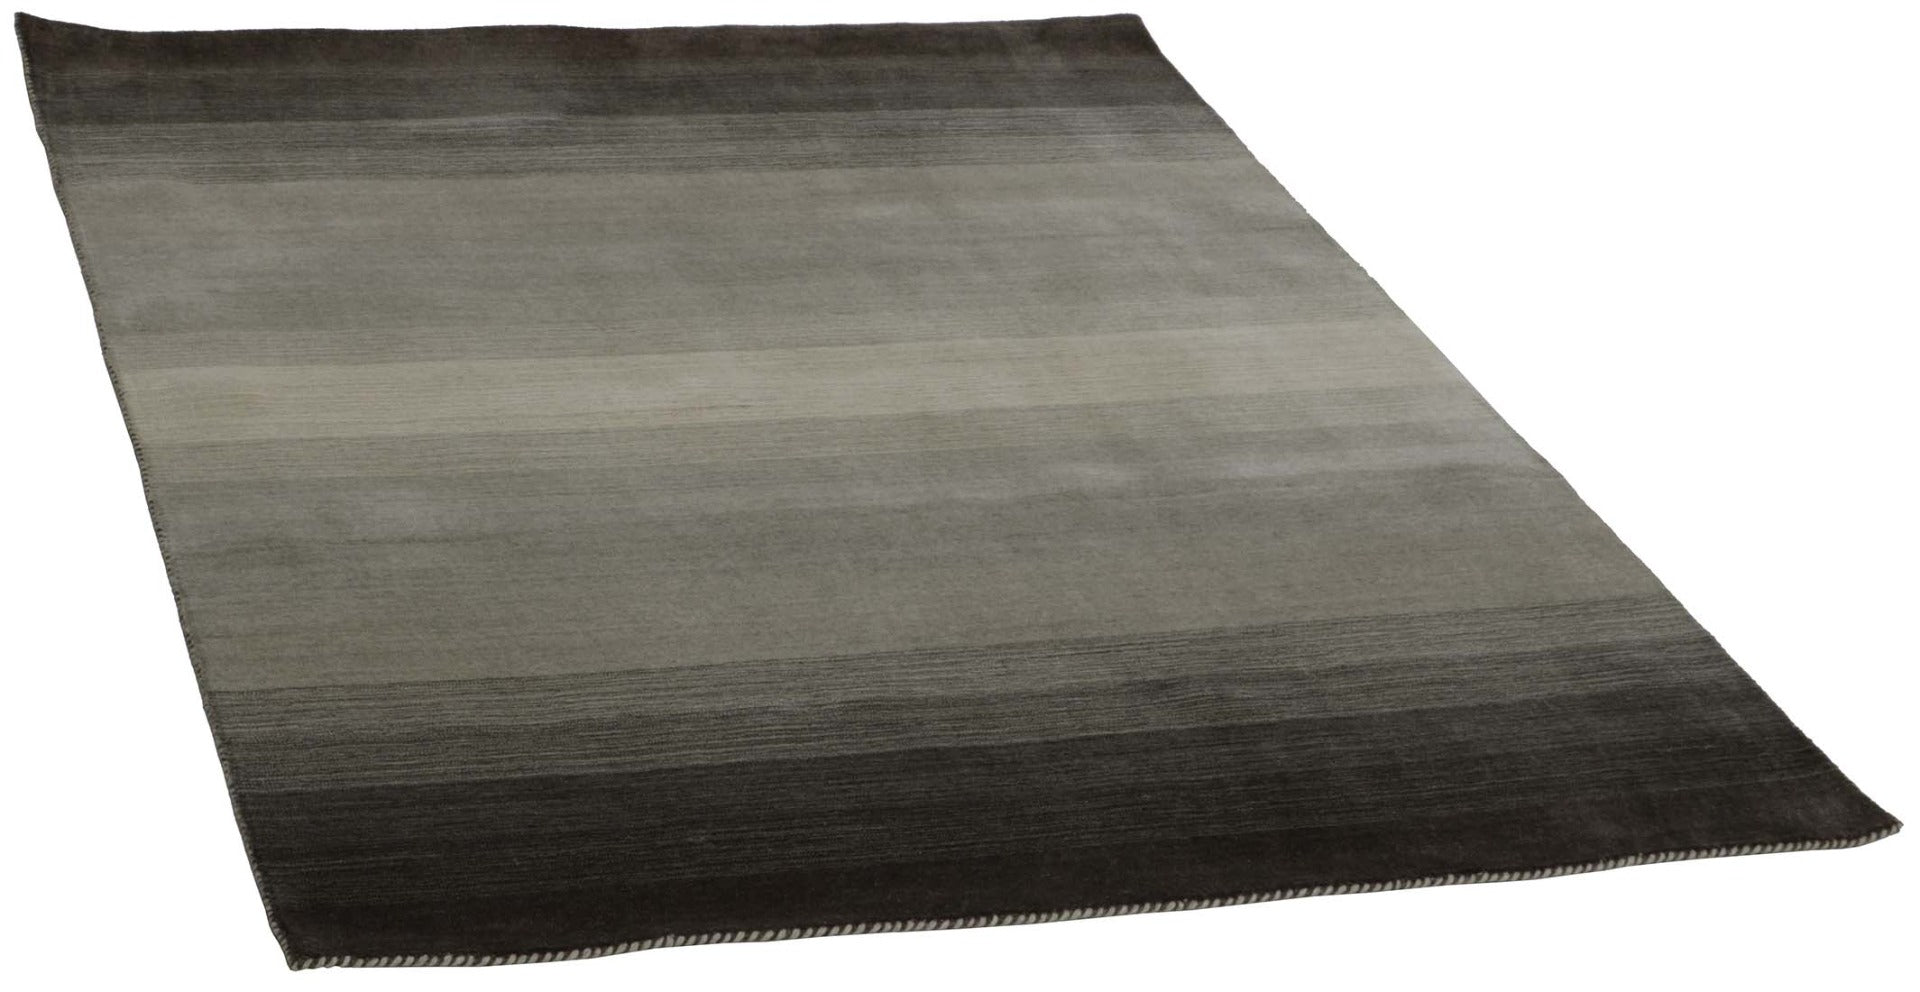  grey and cream ombre rug
